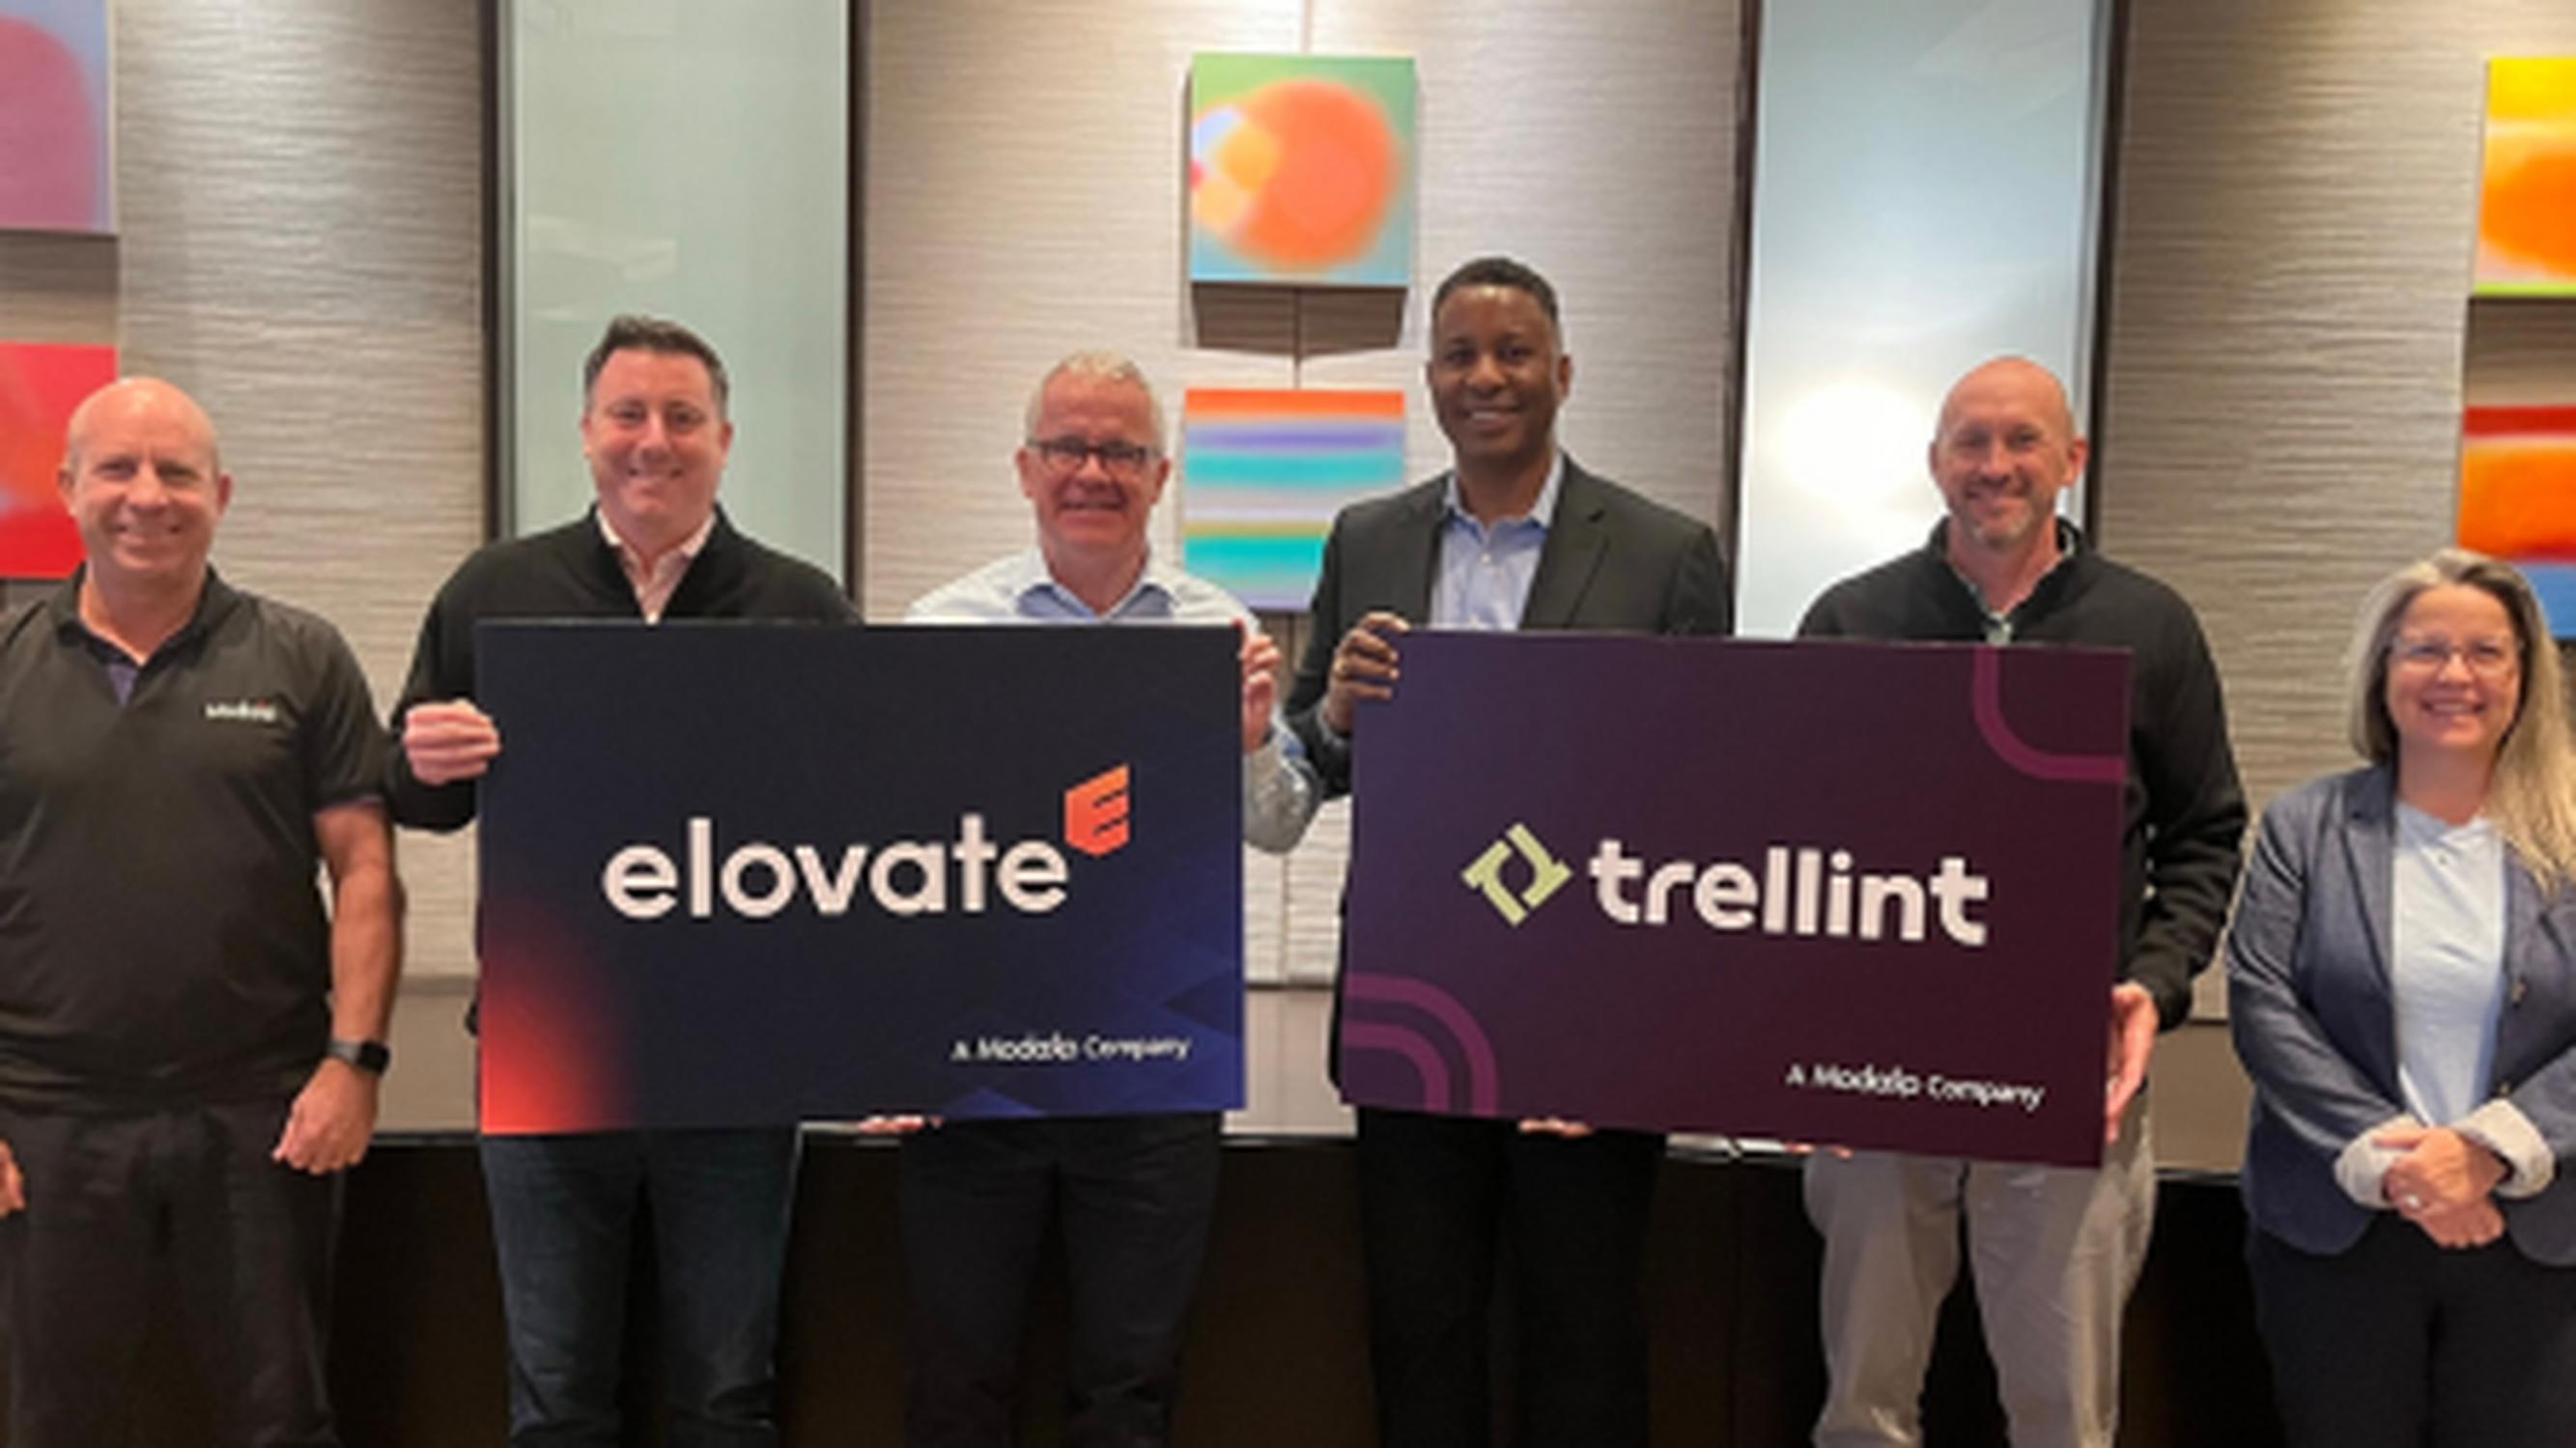 Two new businesses launched to provide automated traffic enforcement and parking services ­– Elovate and Trellint